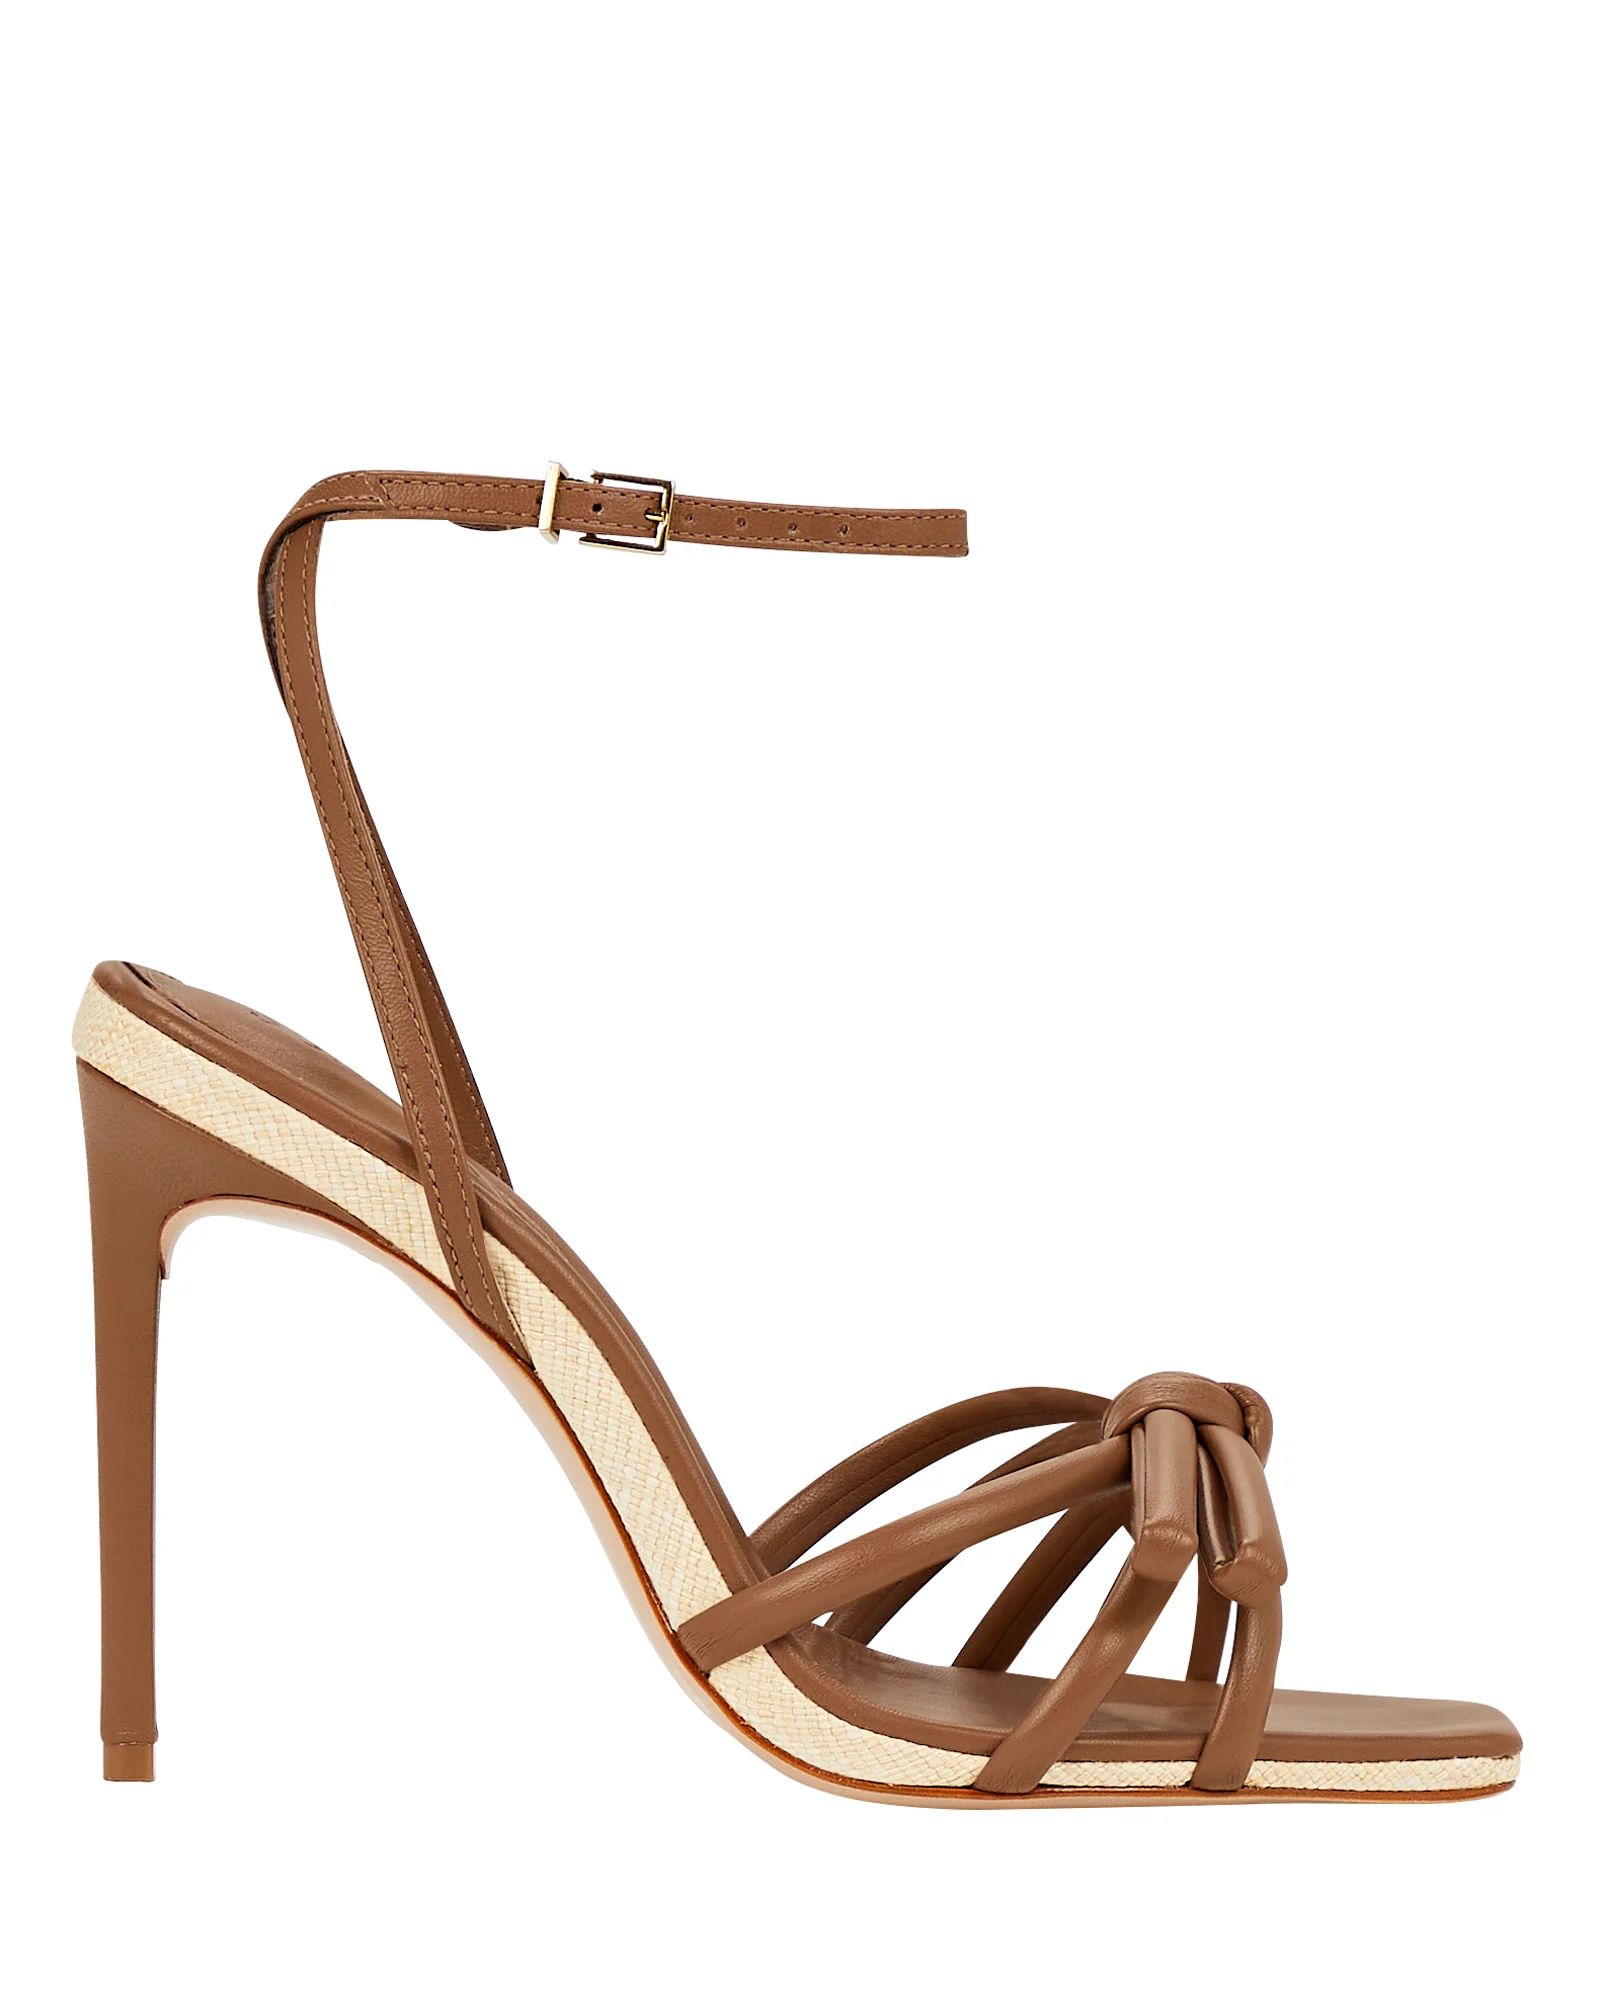 Blossom Bow Leather Sandals | INTERMIX